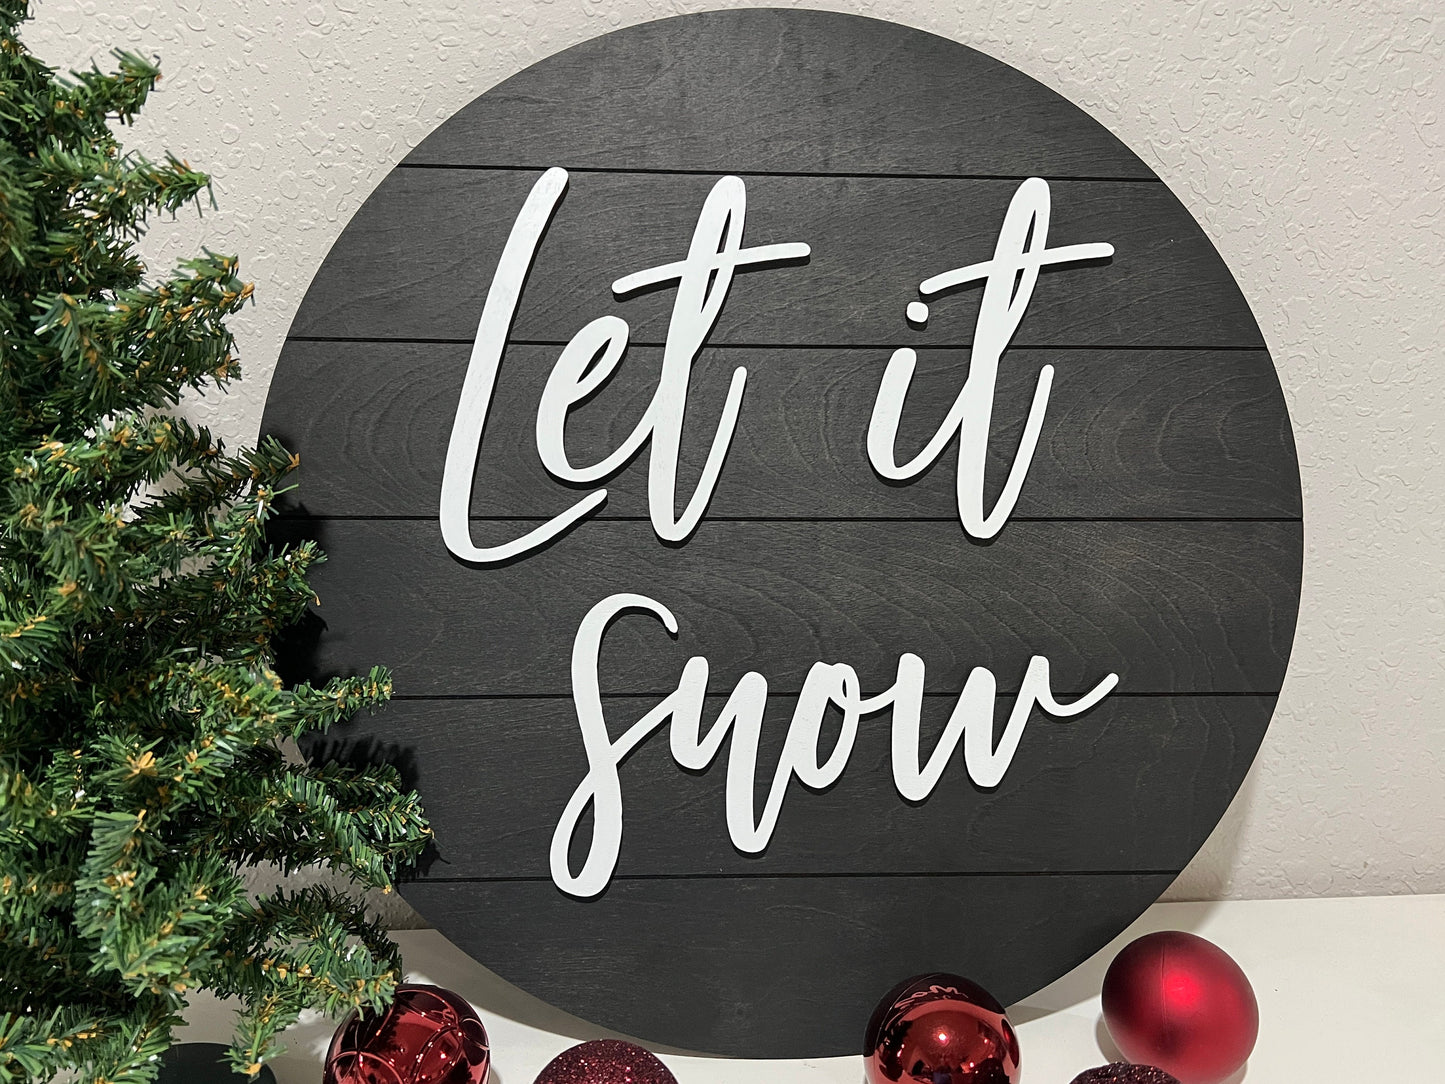 Let it snow sign, Christmas decorations, 3D holiday decor, shiplap wood signs, living room wooden sign wall hanging, black mantel decor